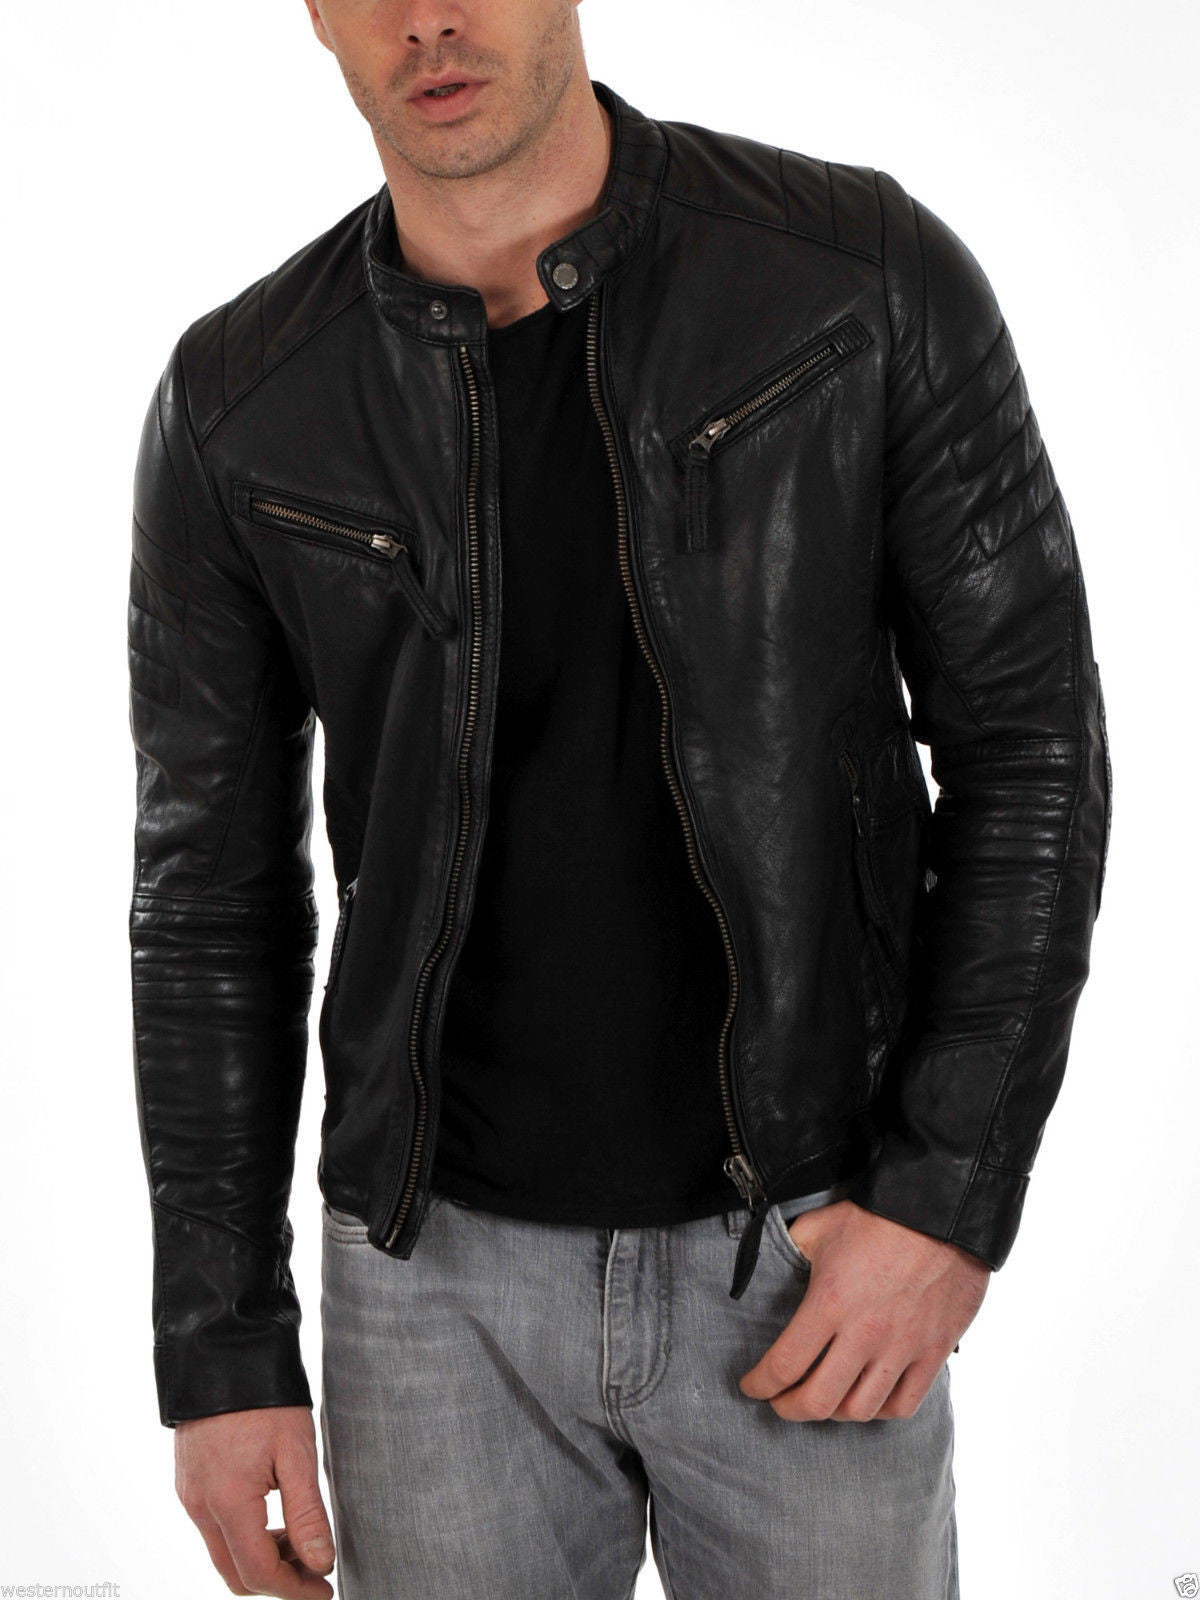 Mens Genuine Leather Biker Jacket Black | Vintage Brown Distressed Lambskin Motorcycle  Jackets for Men (Black, X-Small) at Amazon Men's Clothing store